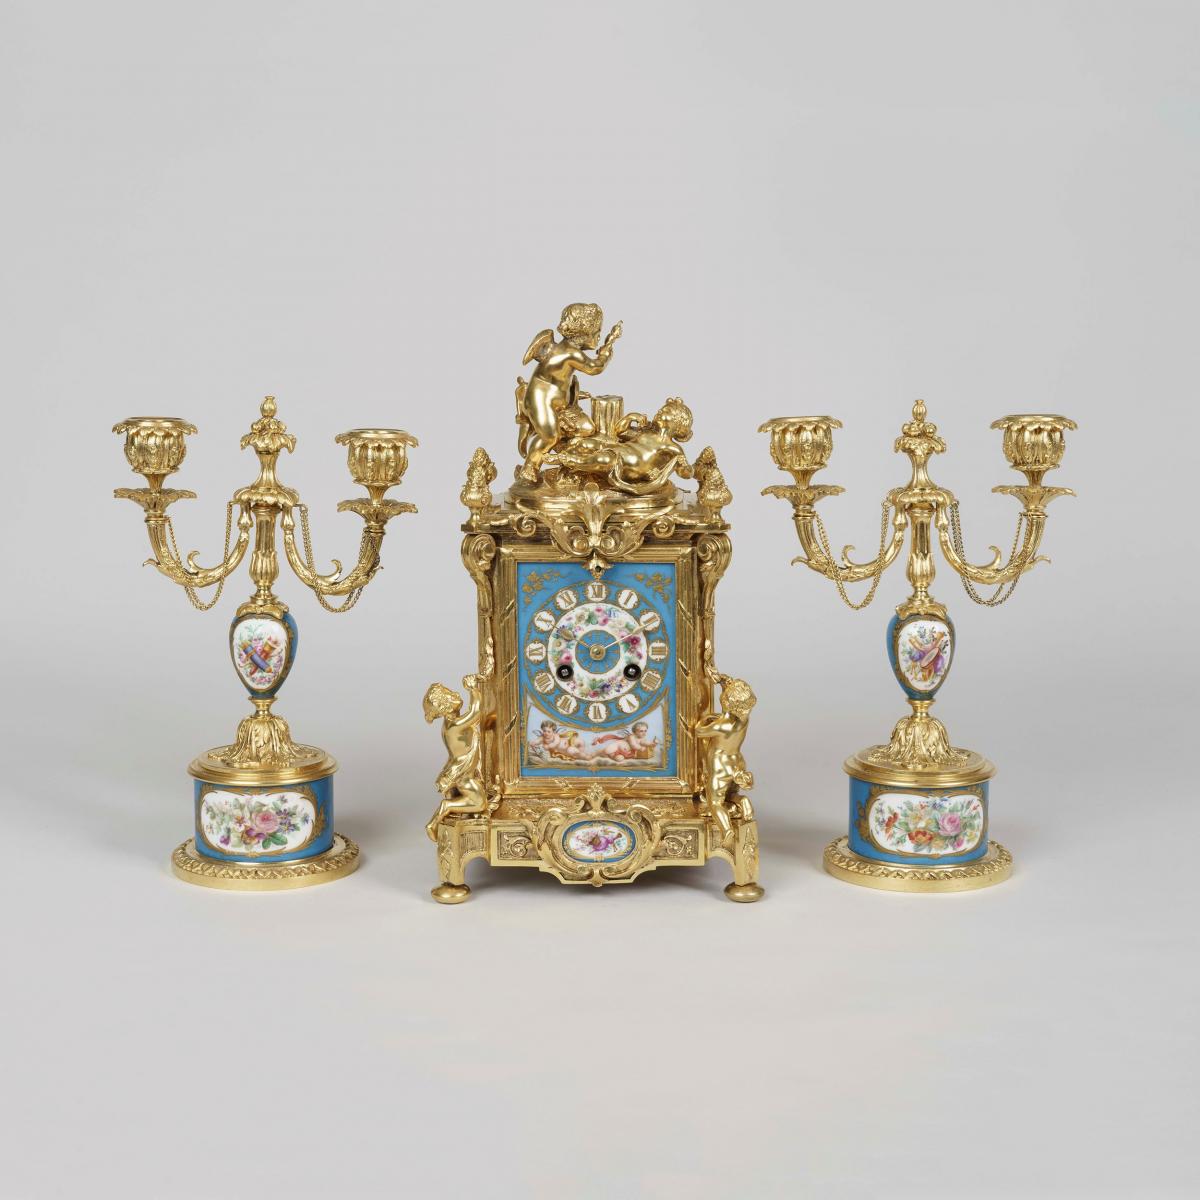 A Clock Garniture in the Louis XVI Manner By Le Roy et Fils